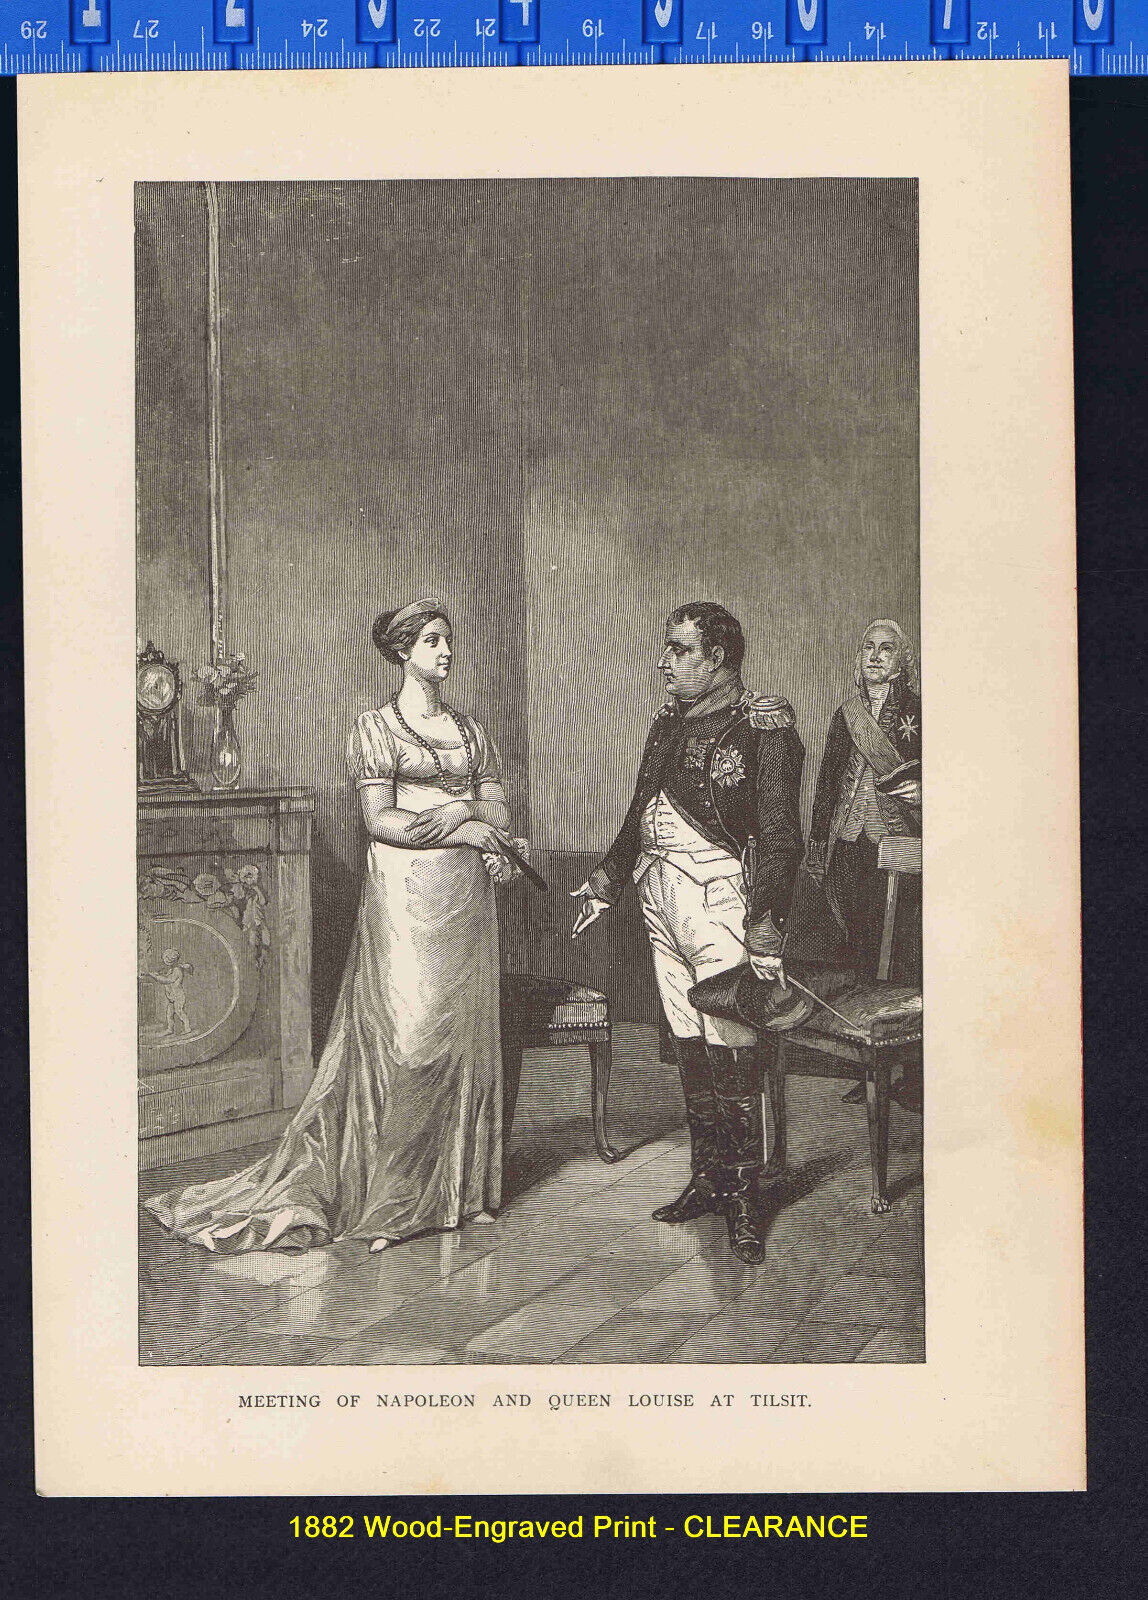 Meeting of Napoleon and Queen Louise at Tilsit - 1882 Print CLEARANCE